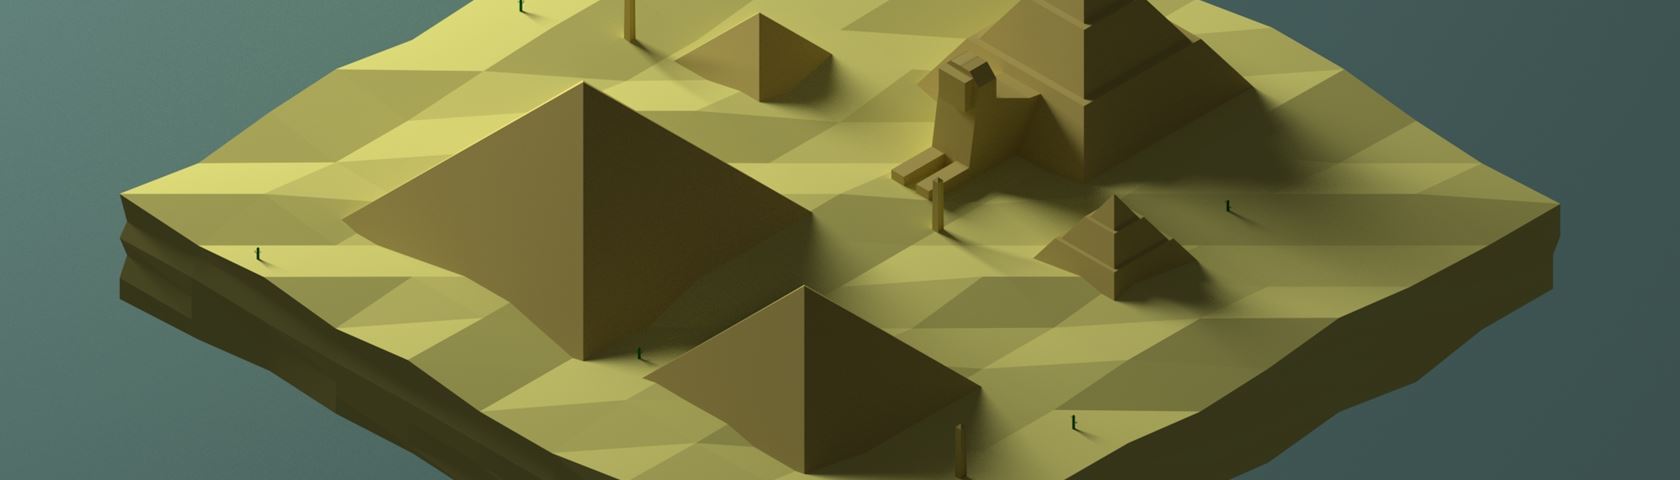 Egypt Low Poly Isometric Render